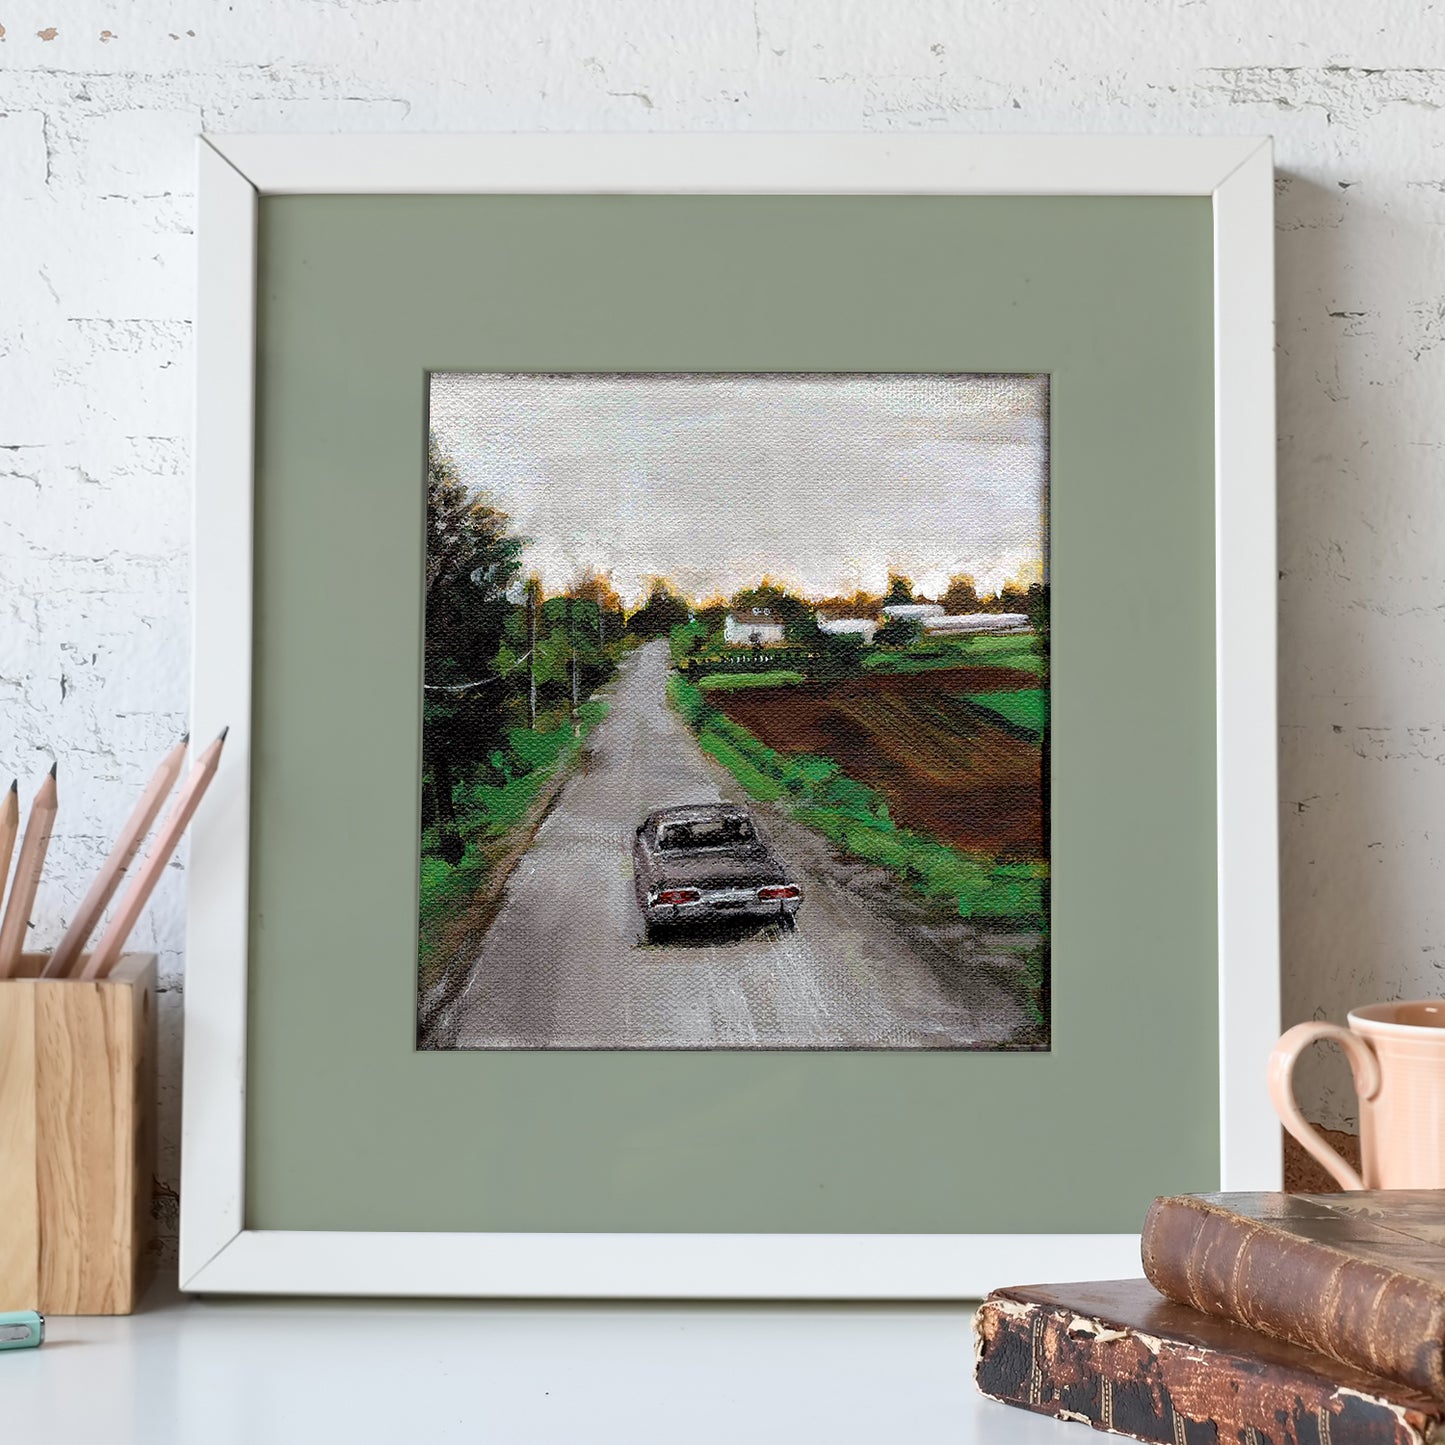 A white-framed lithograph against a white stone wall. The lithograph depicts a black Impala driving down a dirt road next to a farm. In front of the lithograph is a pencil holder and a pair of leather-bound books.